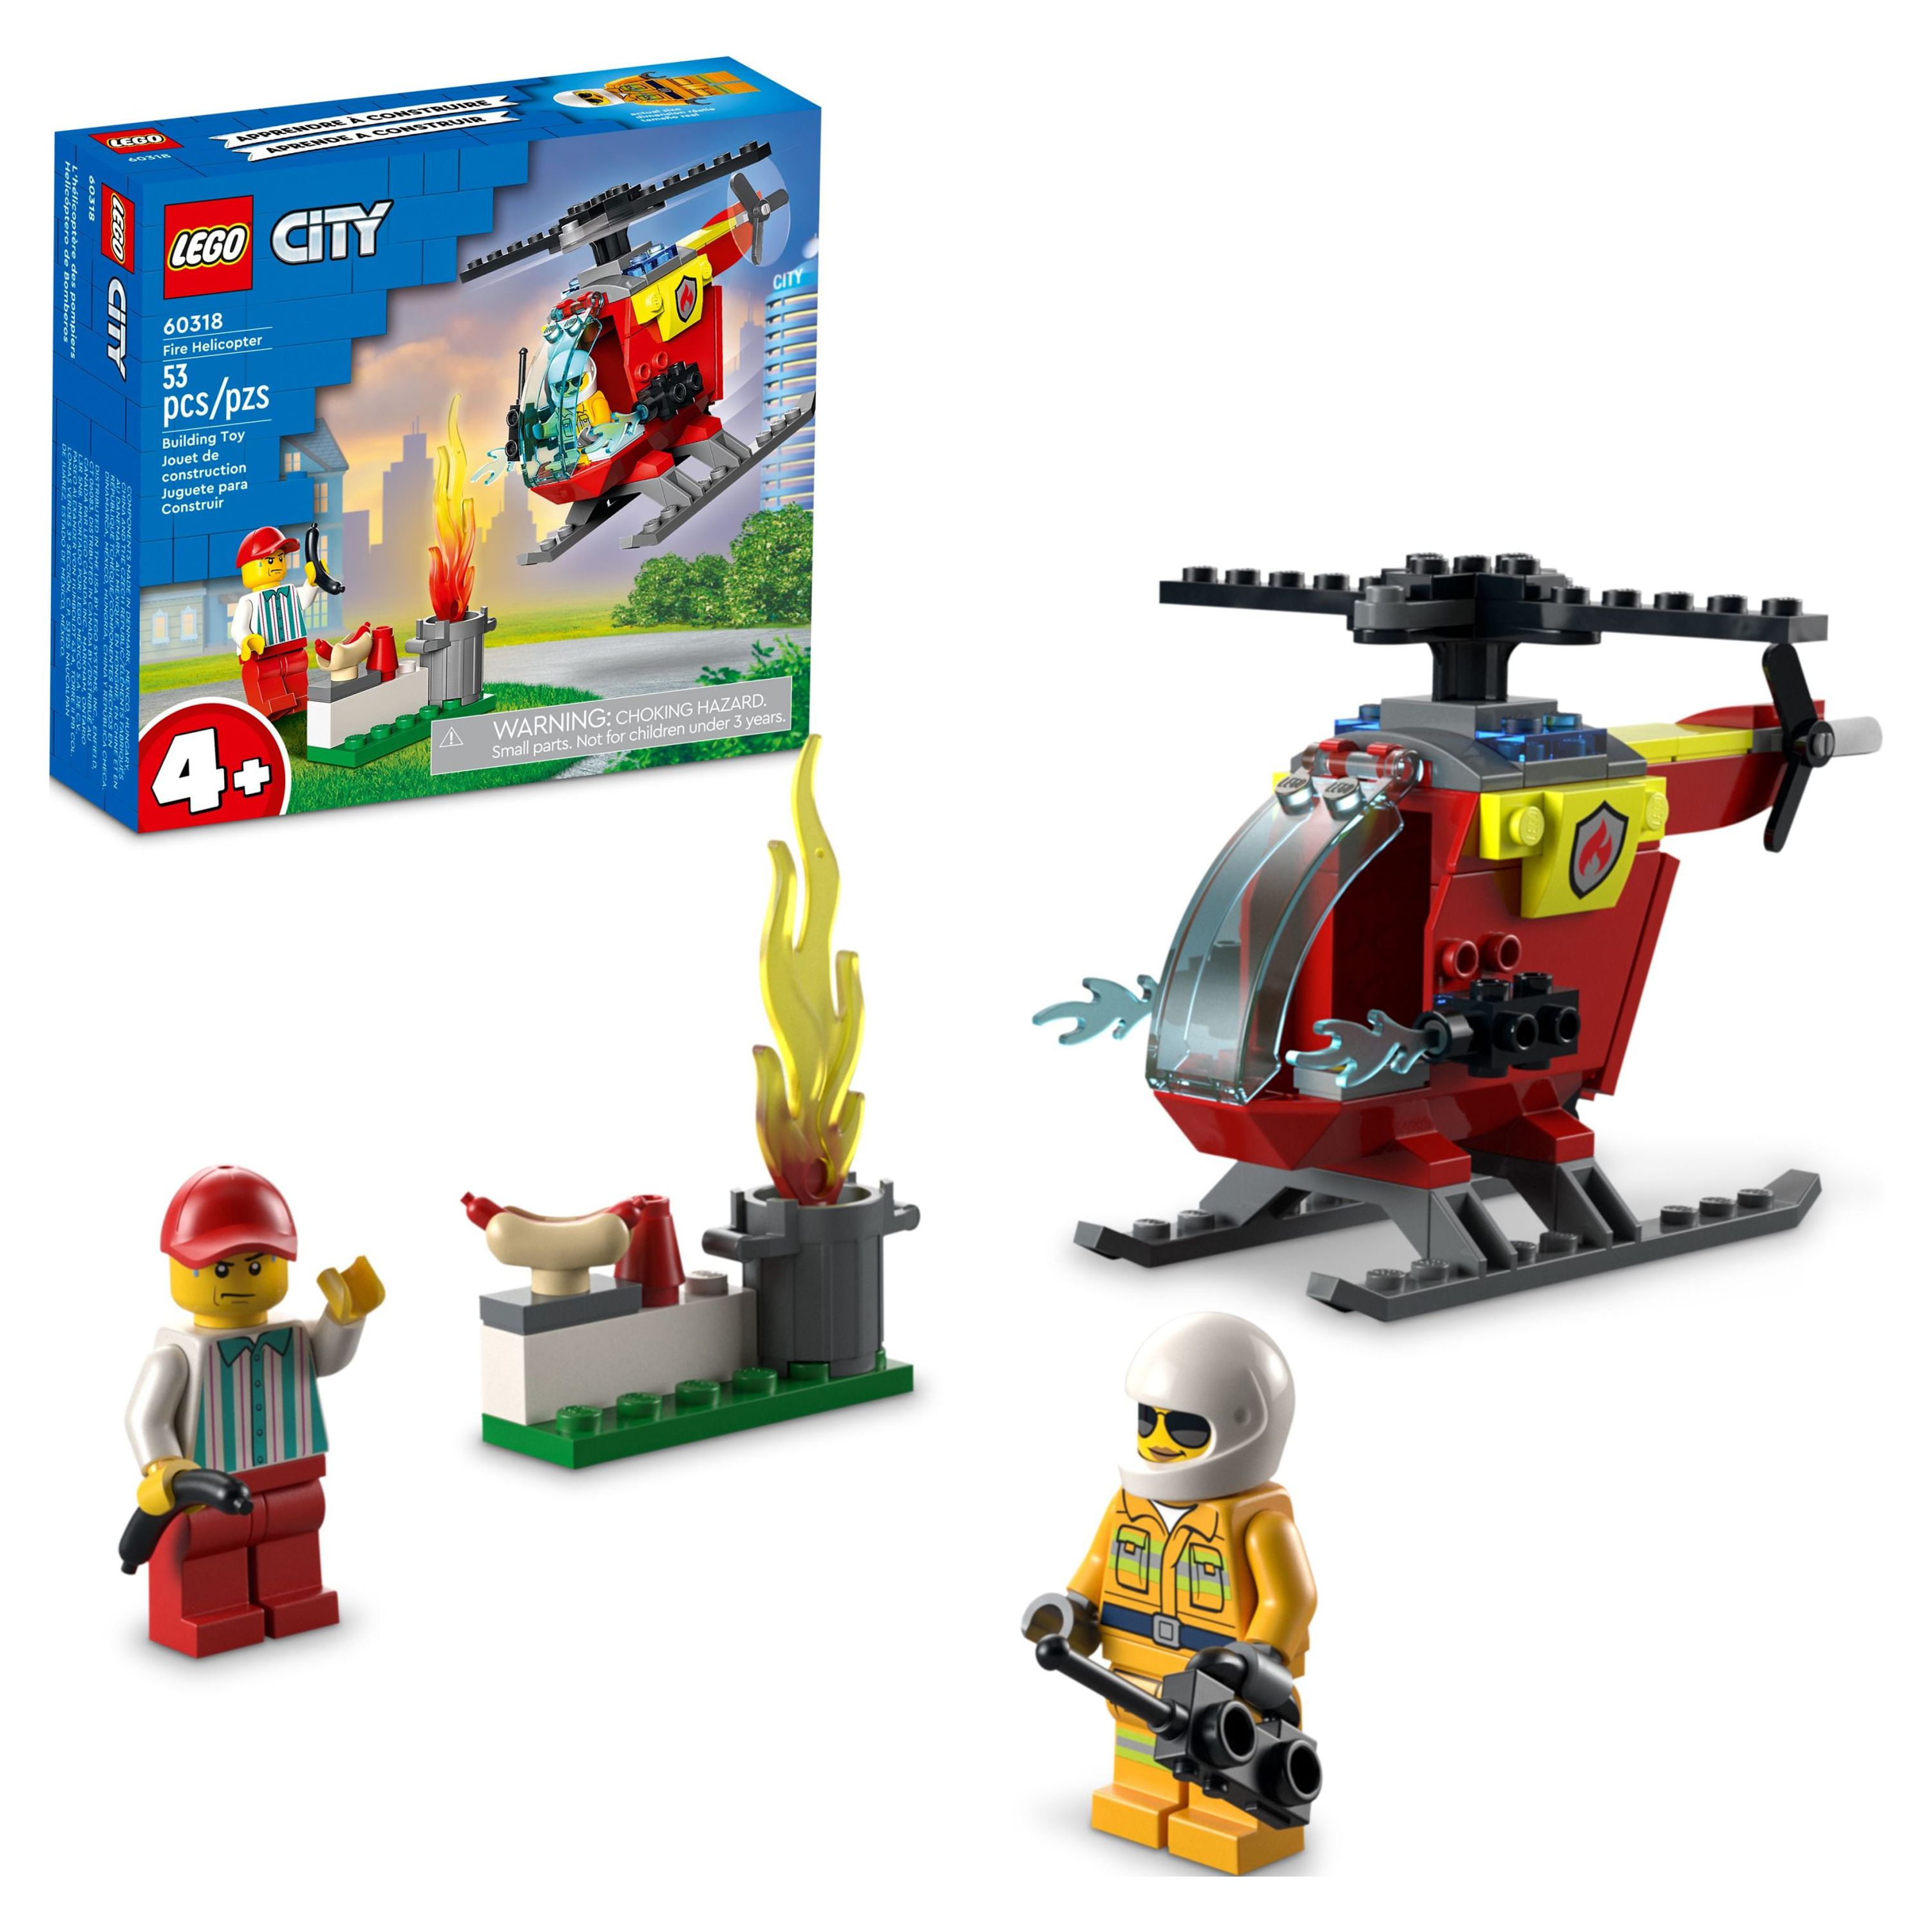 LEGO City Fire Helicopter Toy 60318 for Preschool Kids, Boys and Girls 4 plus Years Old, with Firefighter Minifigure & Starter Brick - image 1 of 8